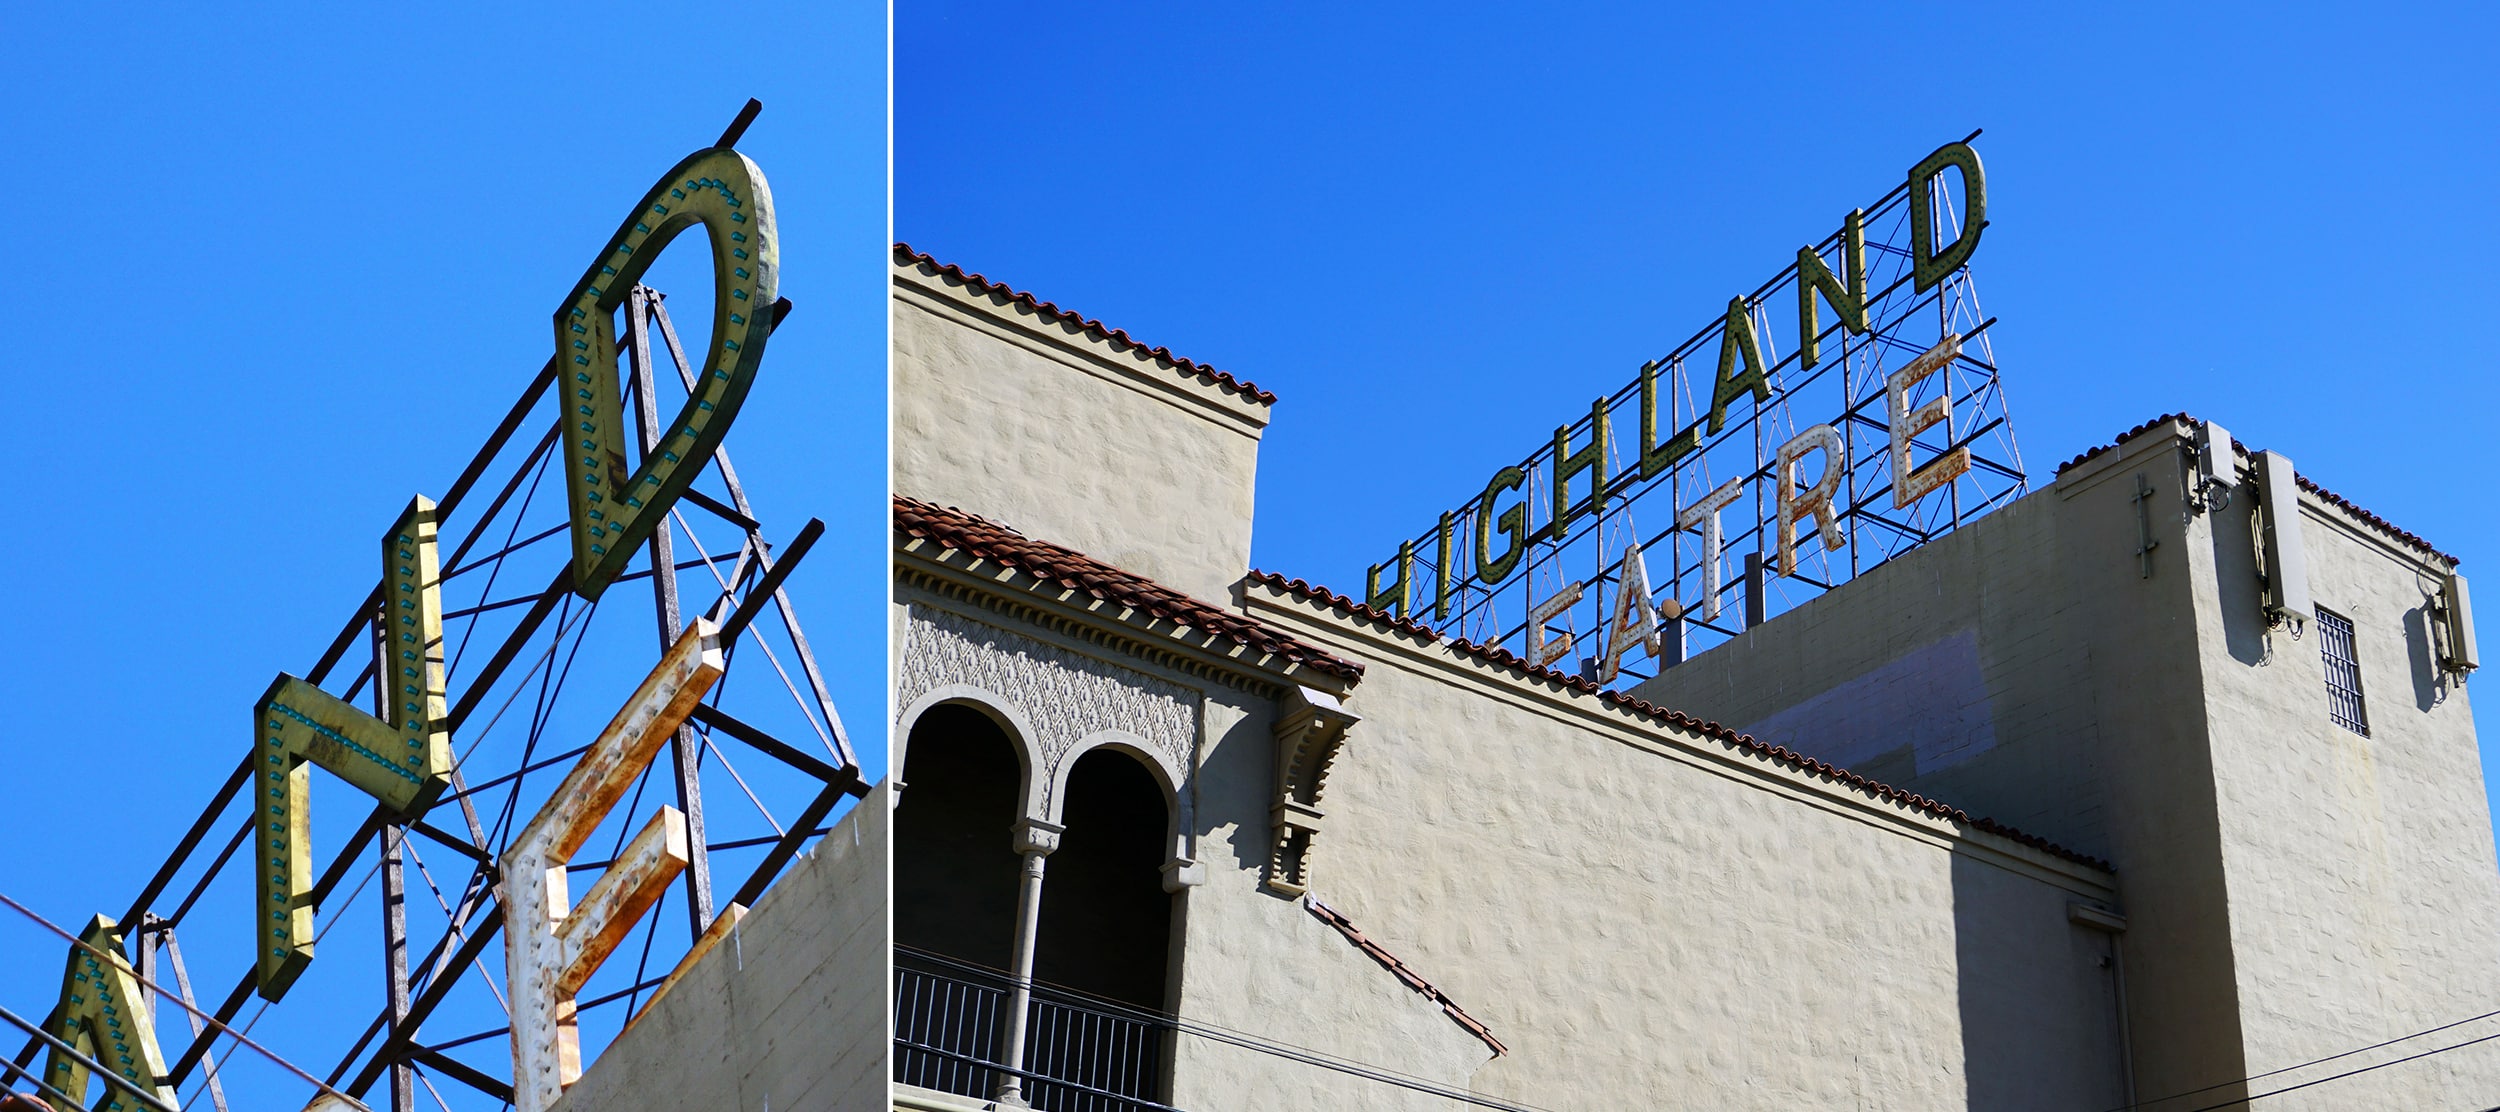 Relighting the century old Highland Theatre sign was a childhood dream come true for Mars.